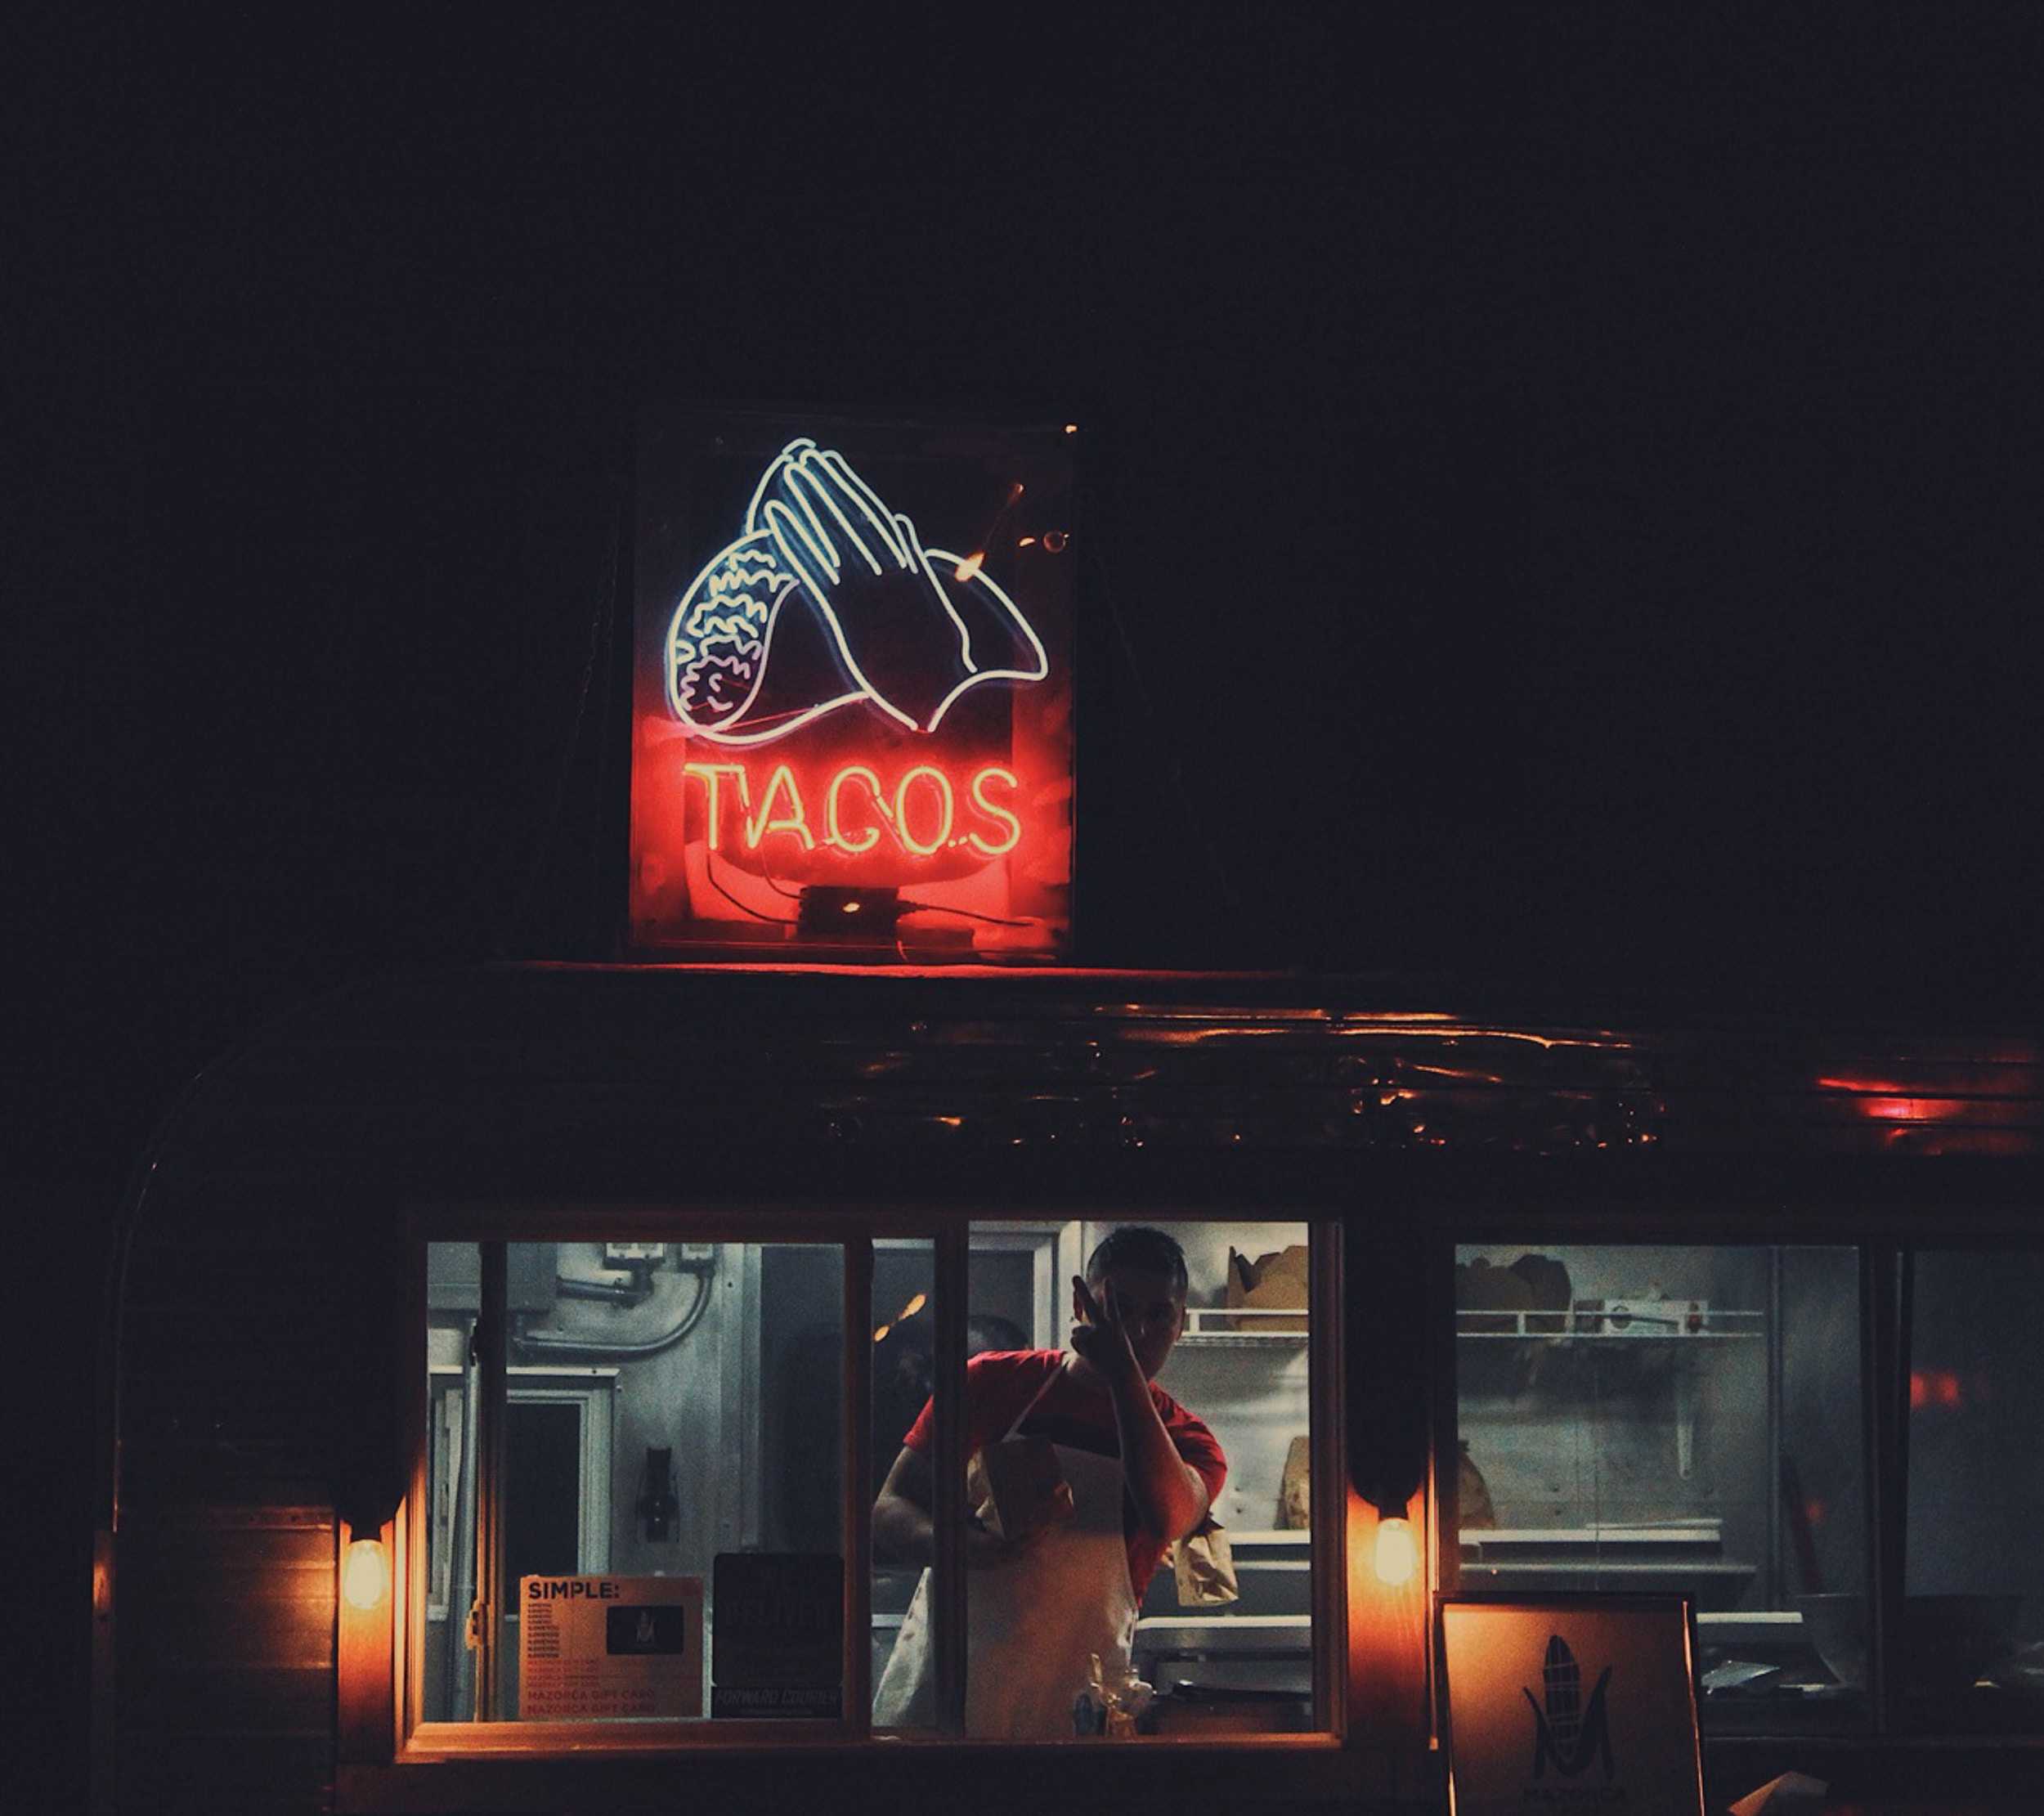 Lights that say taco and a man behind a window